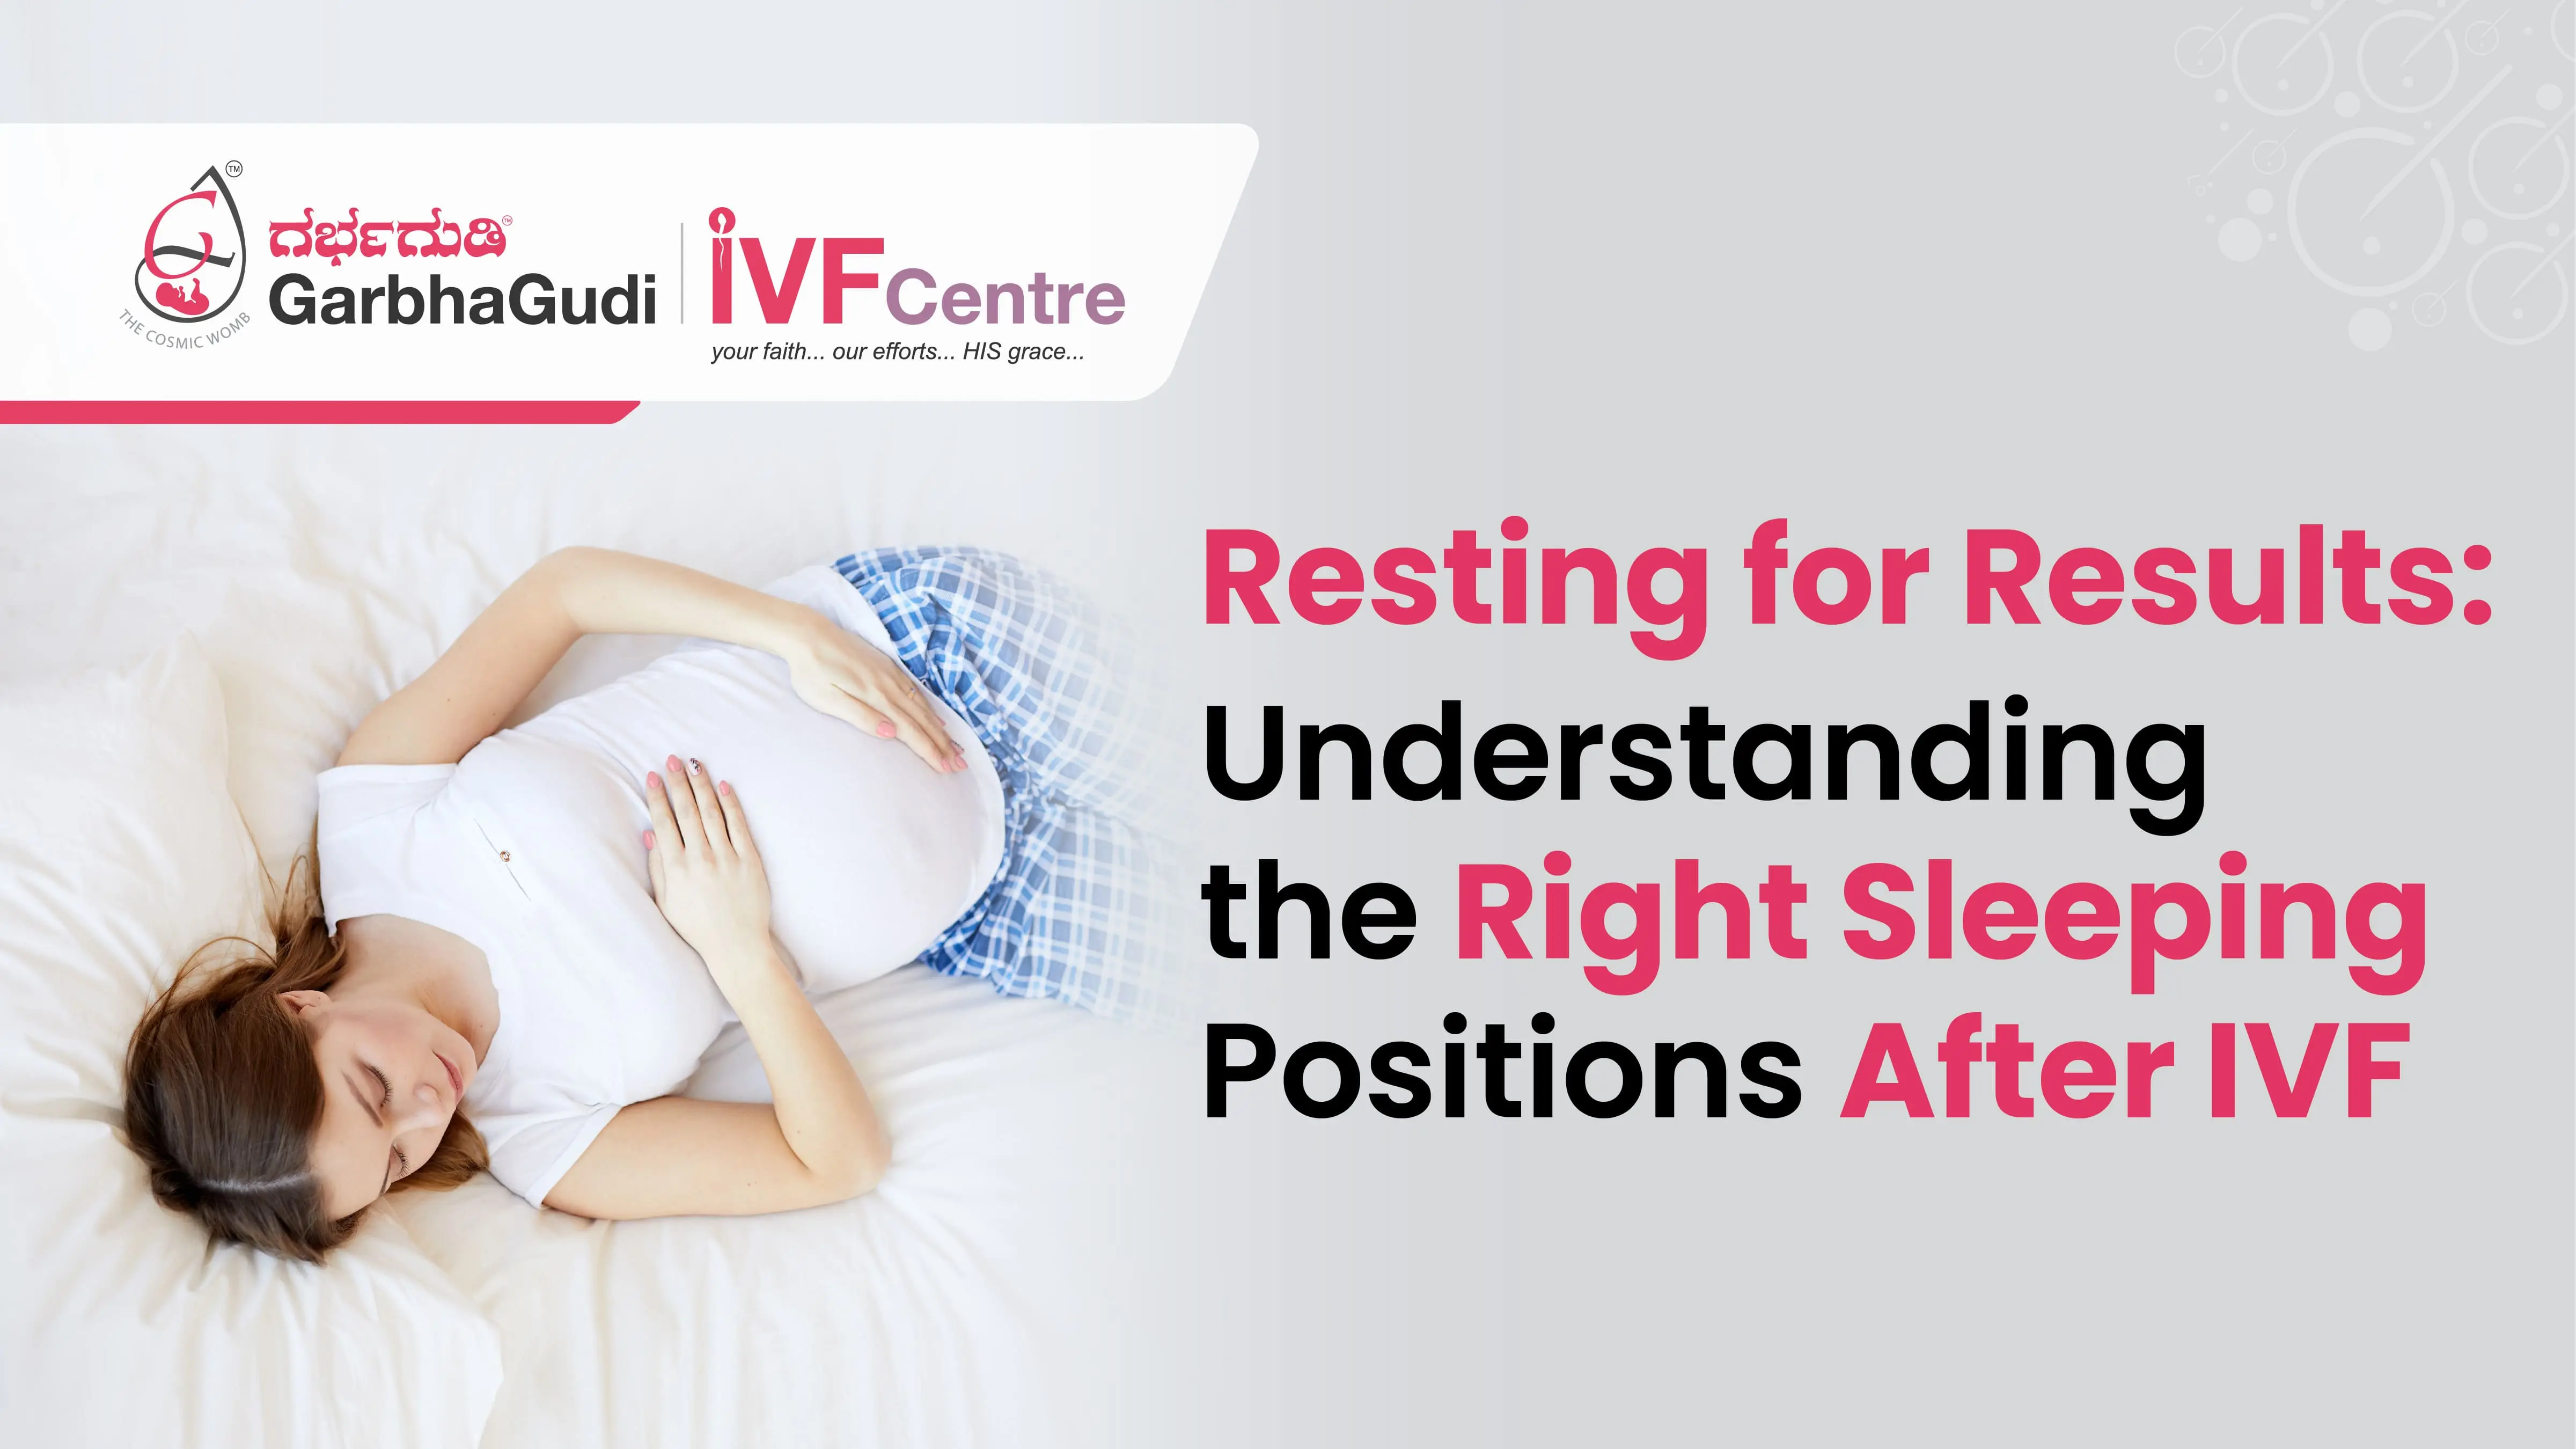 Resting for Results: Understanding the Right Sleeping Positions After IVF